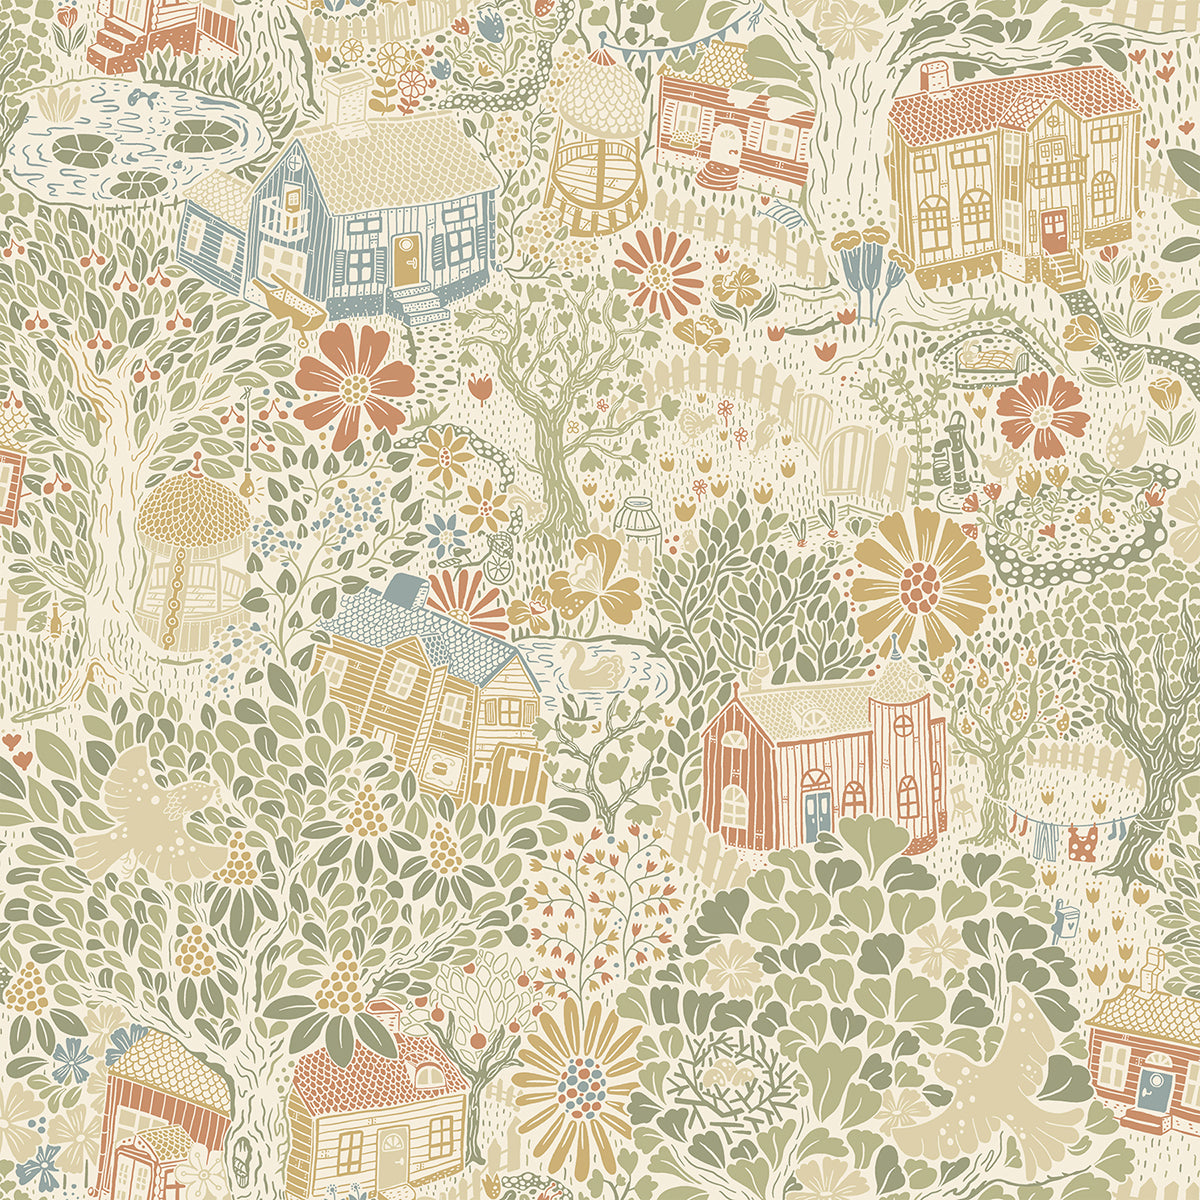 Picture of Bygga Bo Neutral Woodland Village Wallpaper